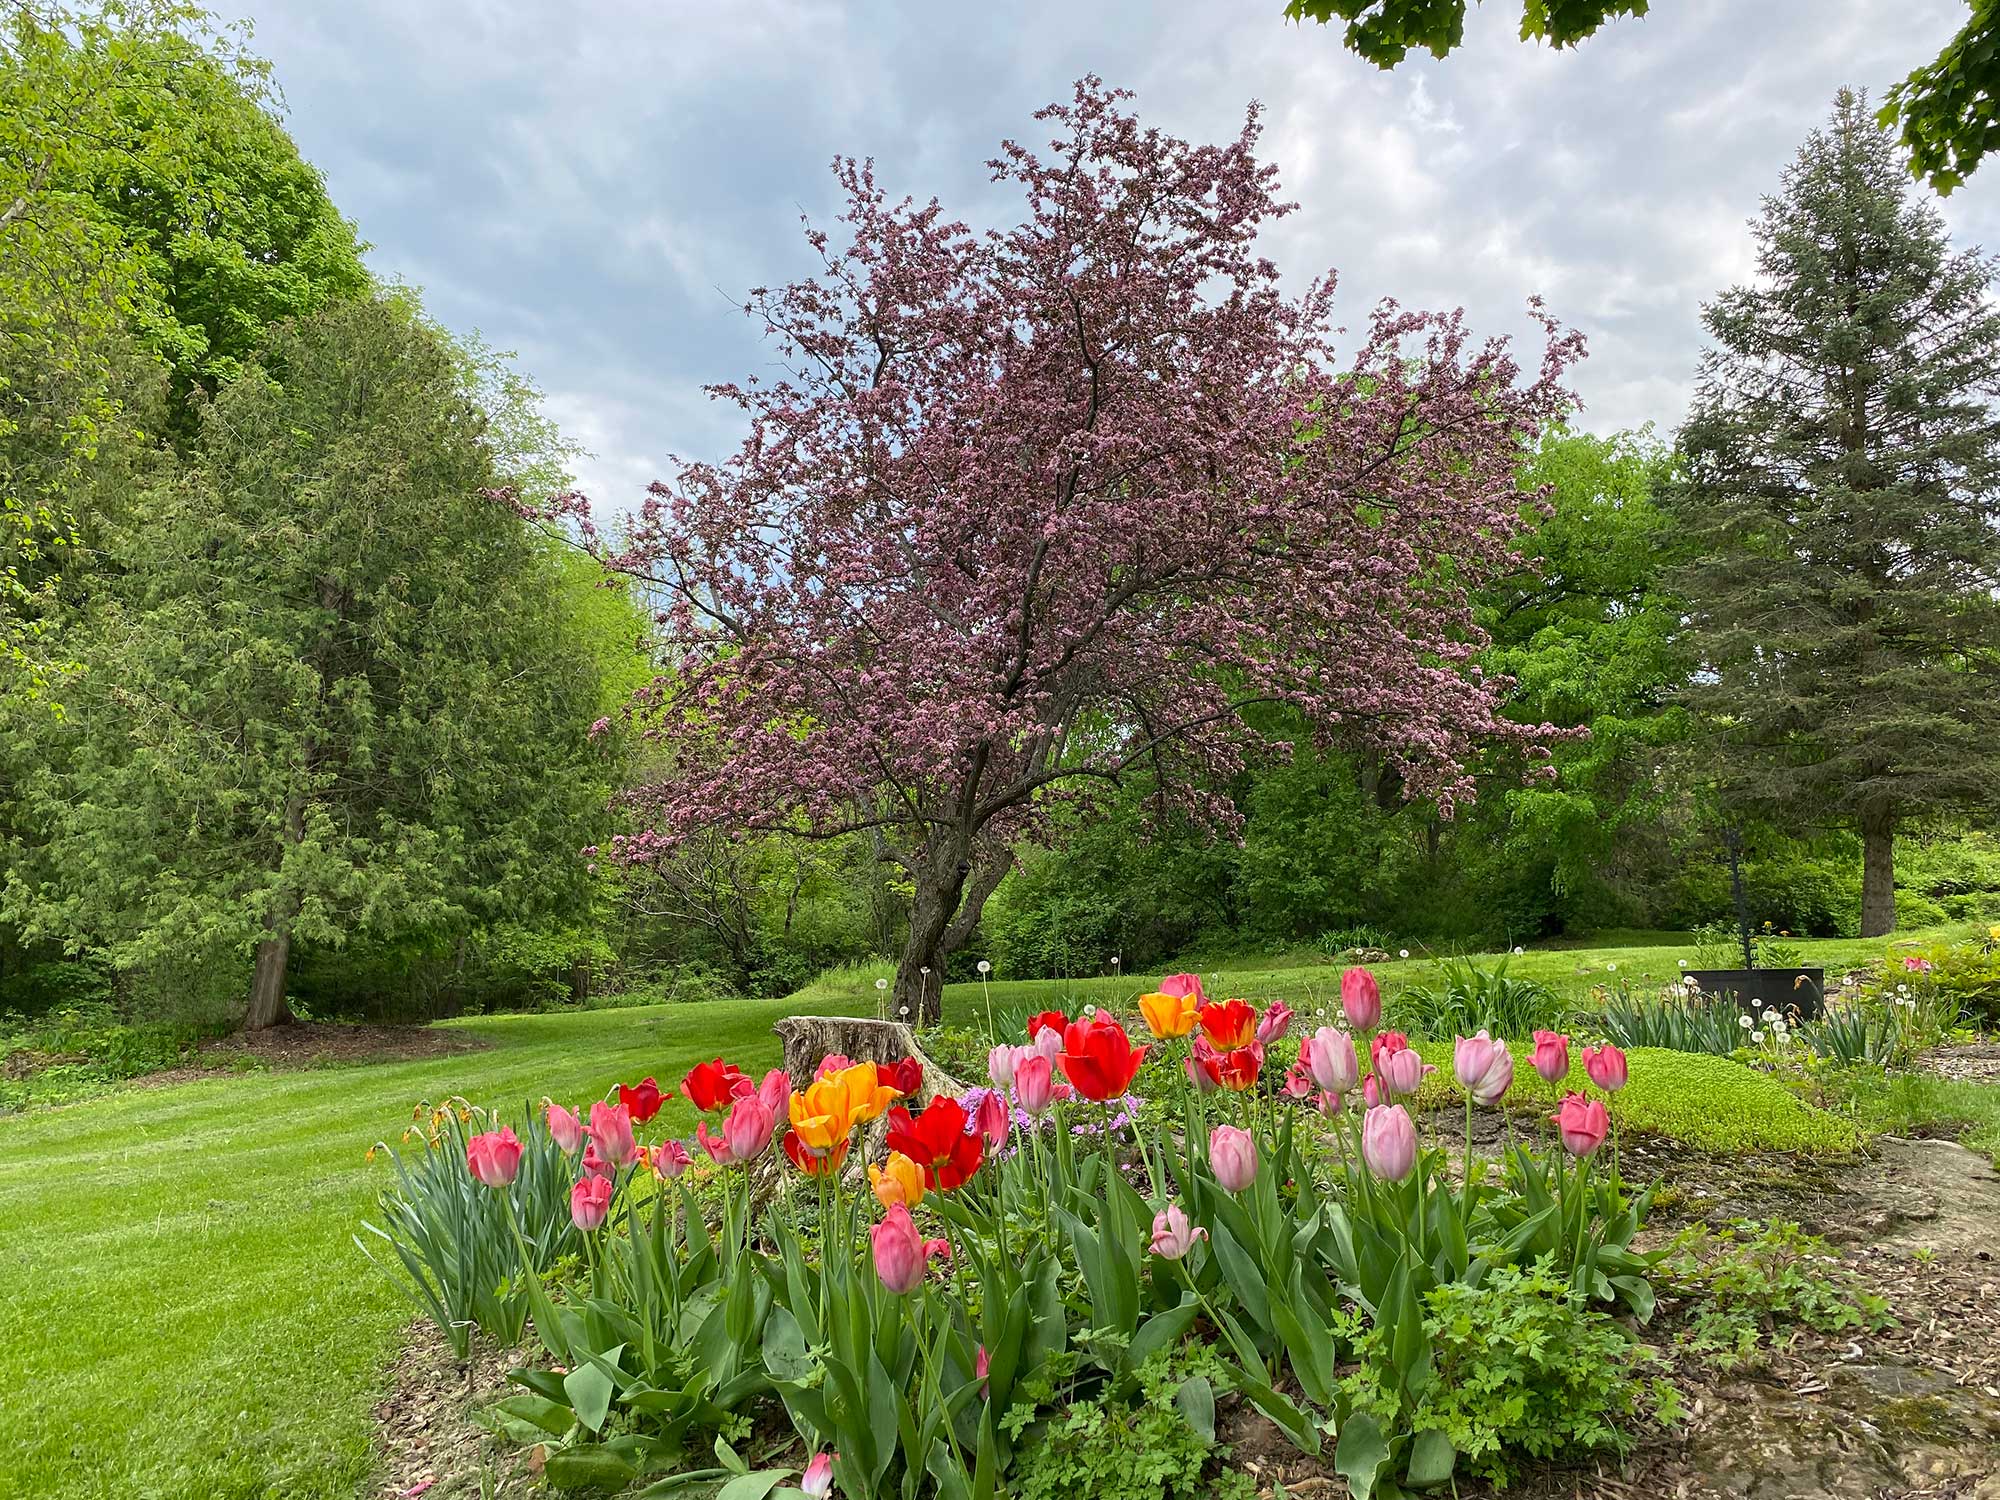 A photo of a garden with tulips in the foreground and a blooming crabapple tree in the background.